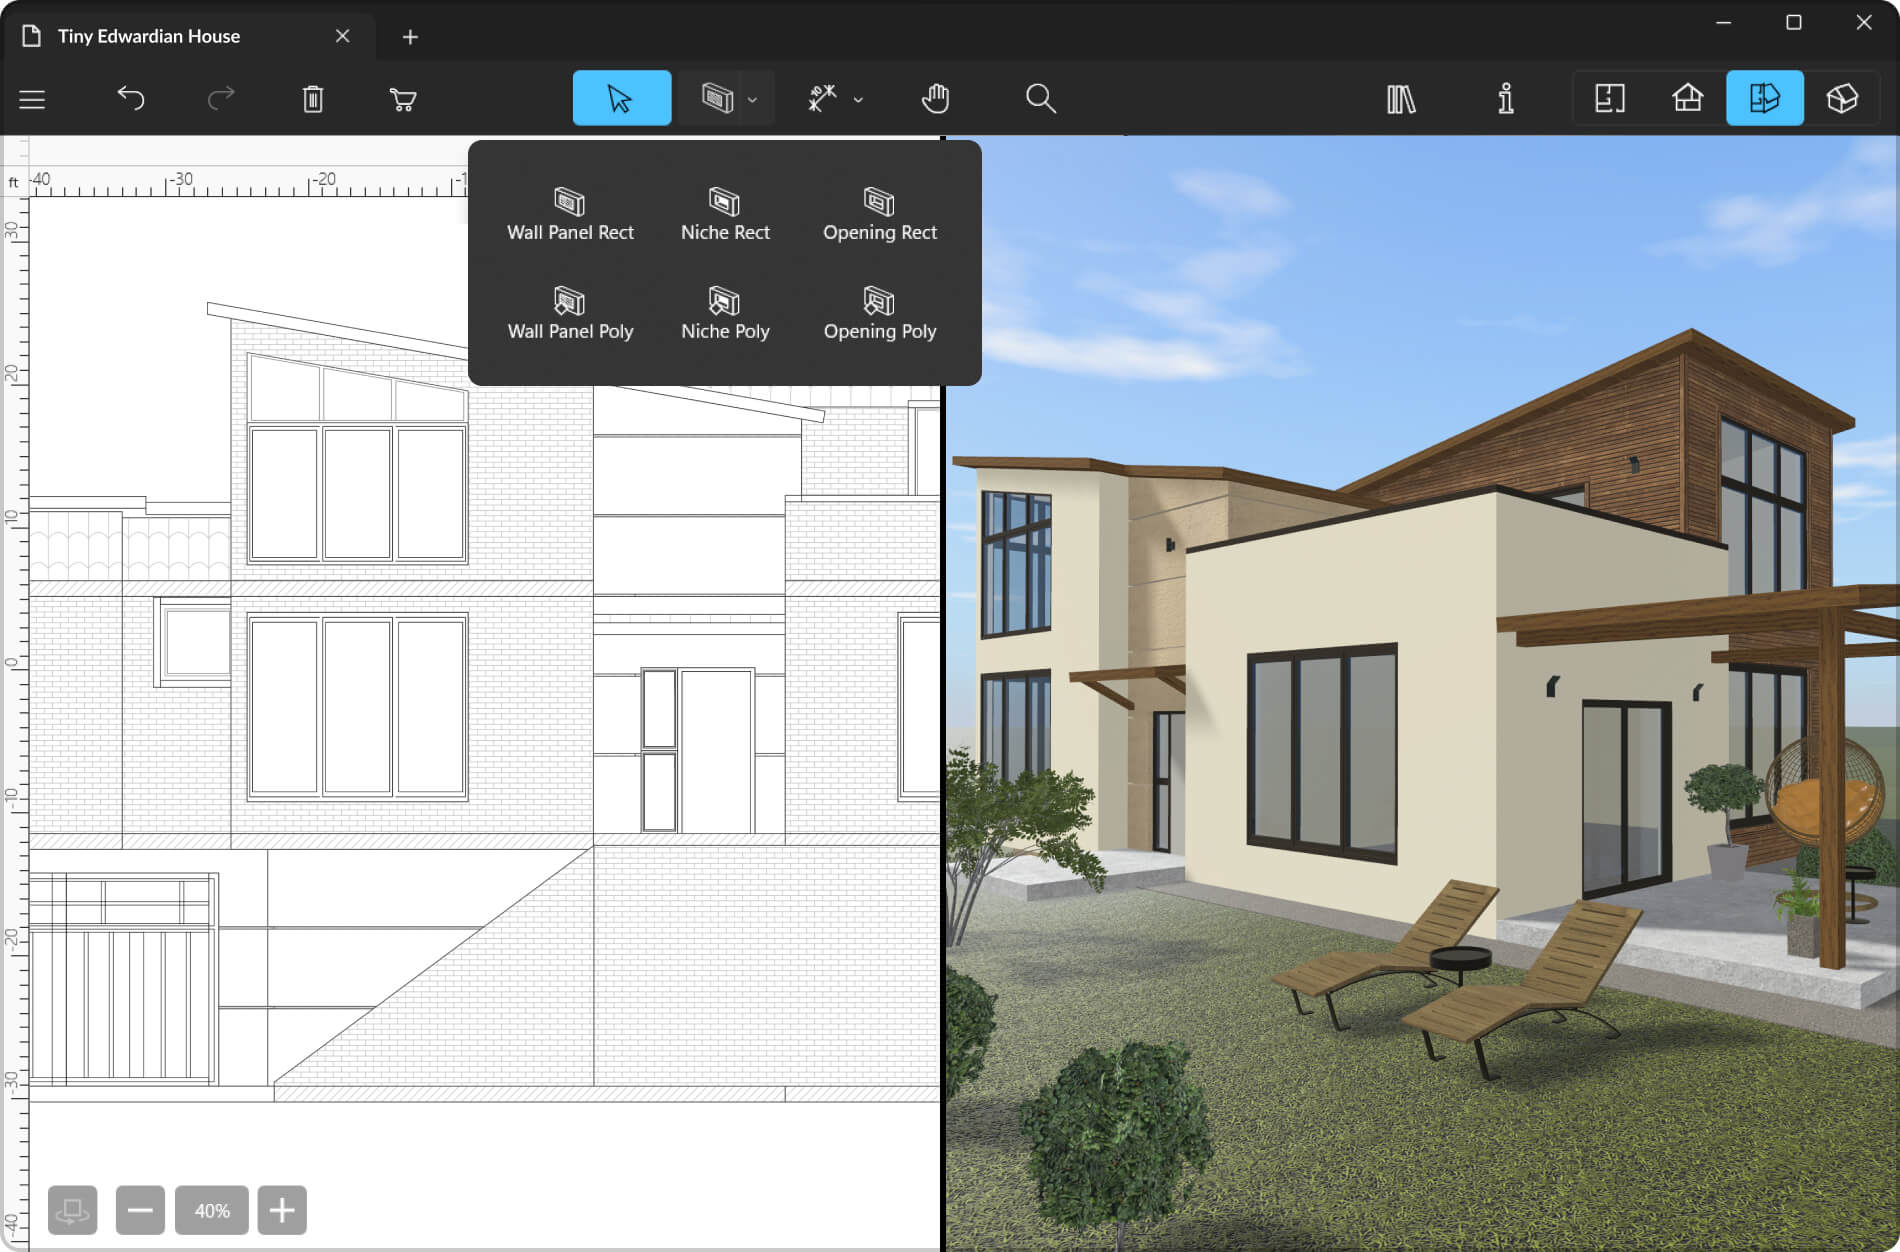 Split mode of Live Home 3D Pro for Windows with the Elevation view and 3D view.